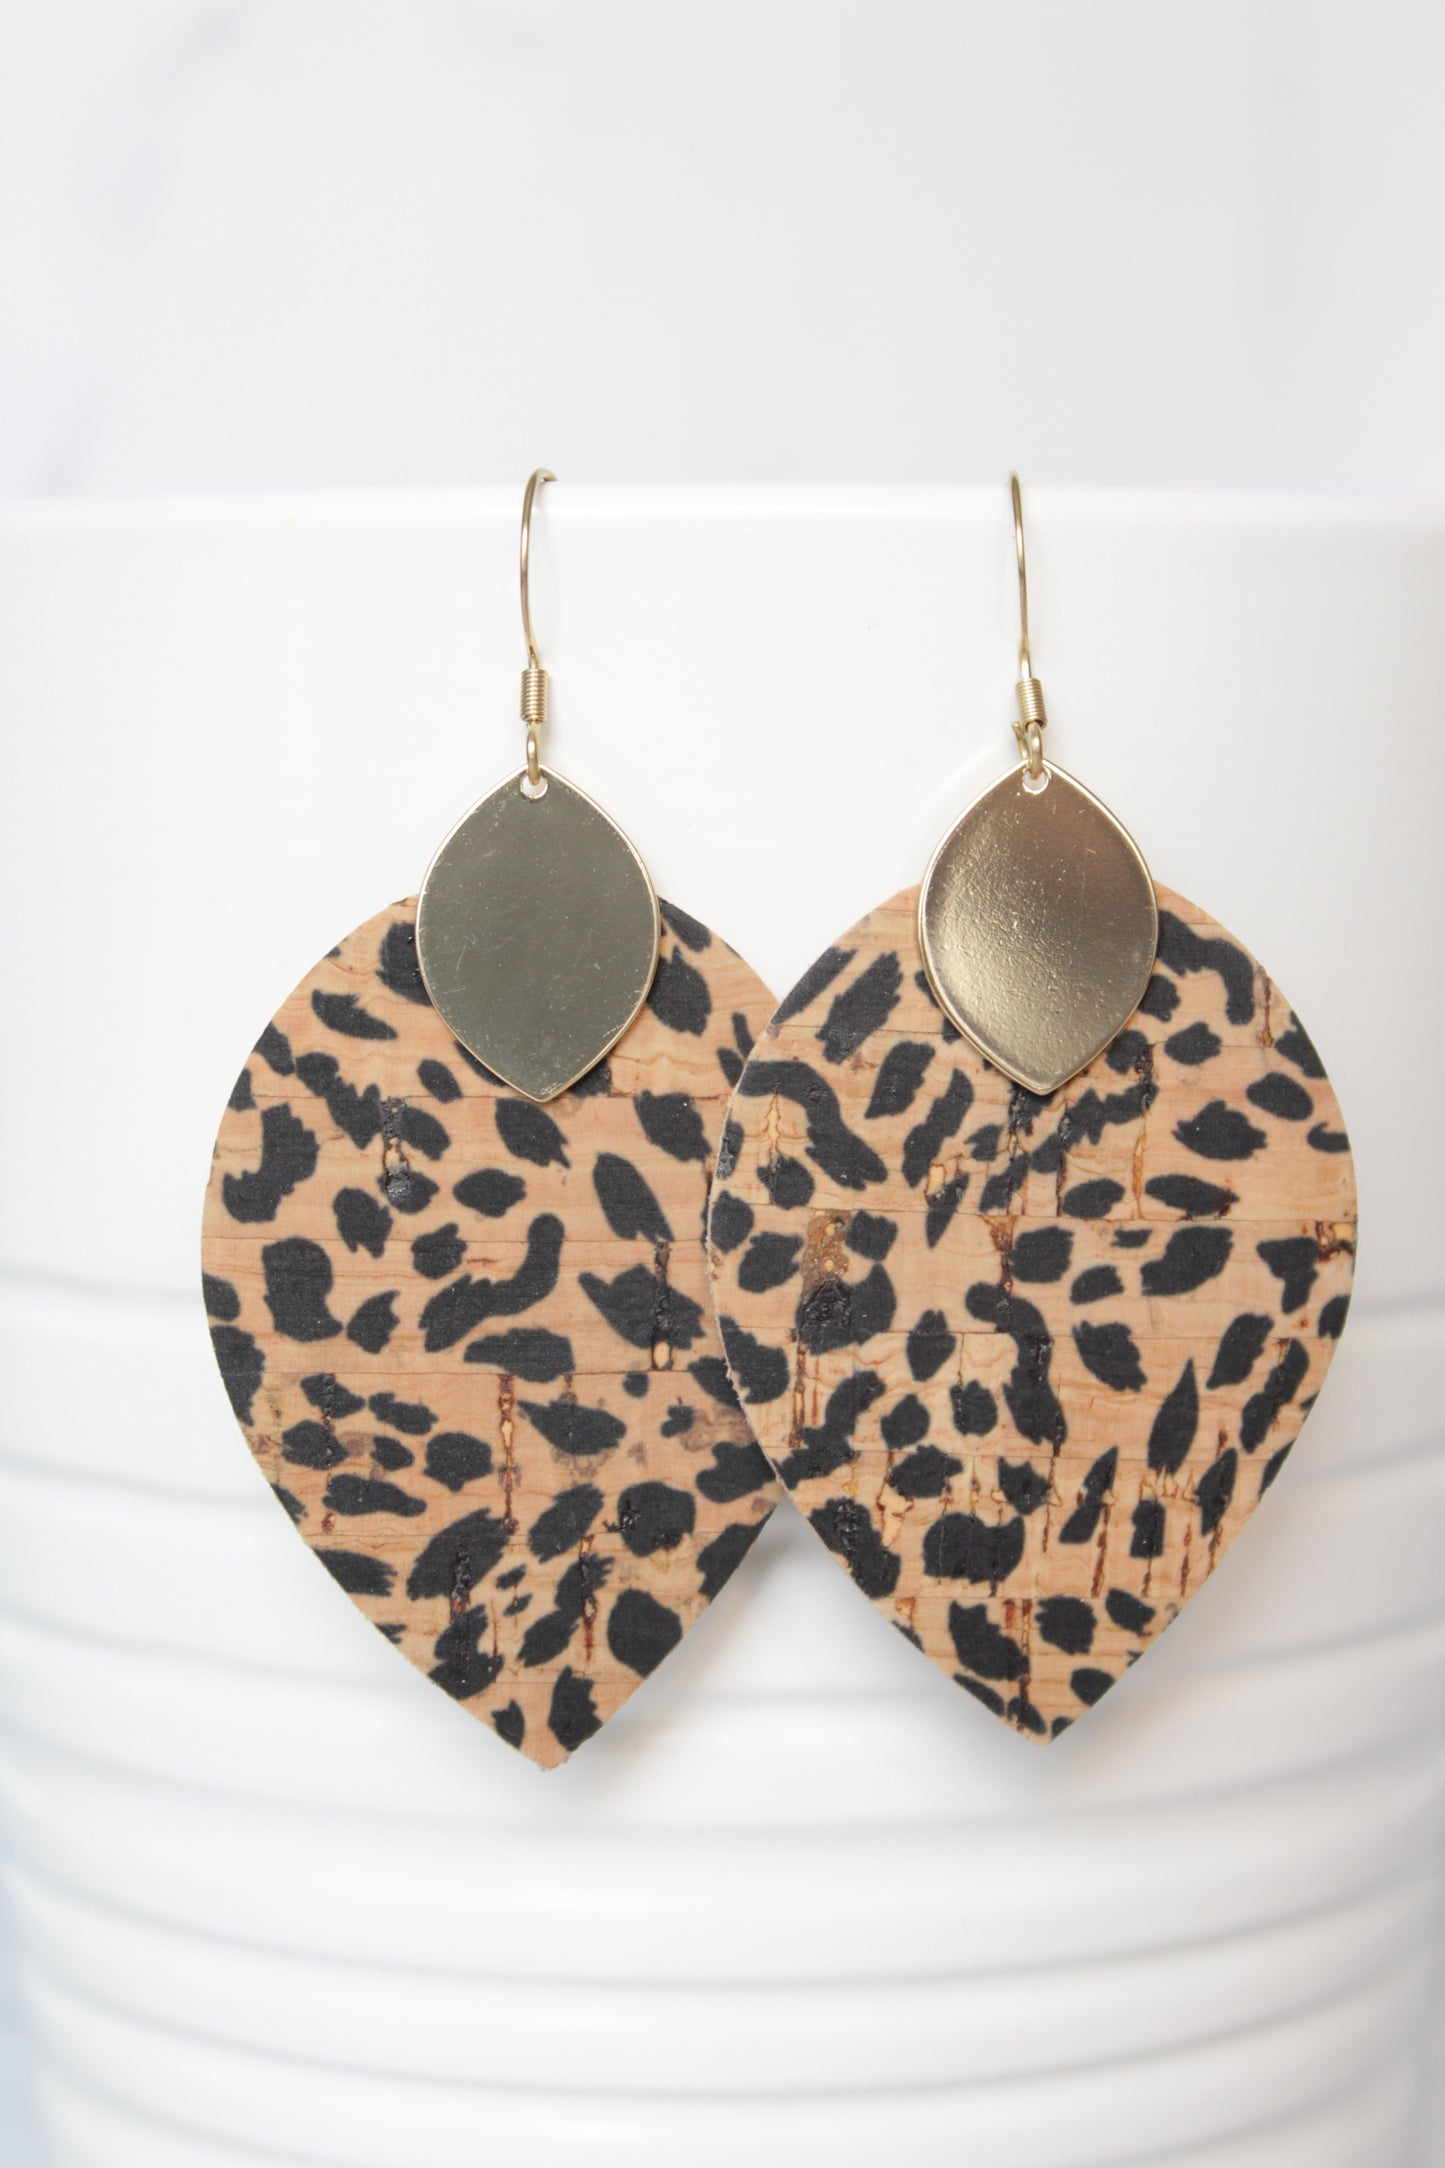 Load image into Gallery viewer, Cora Leather Earrings - Gold Plated Hardware - Multiple Colors Available
